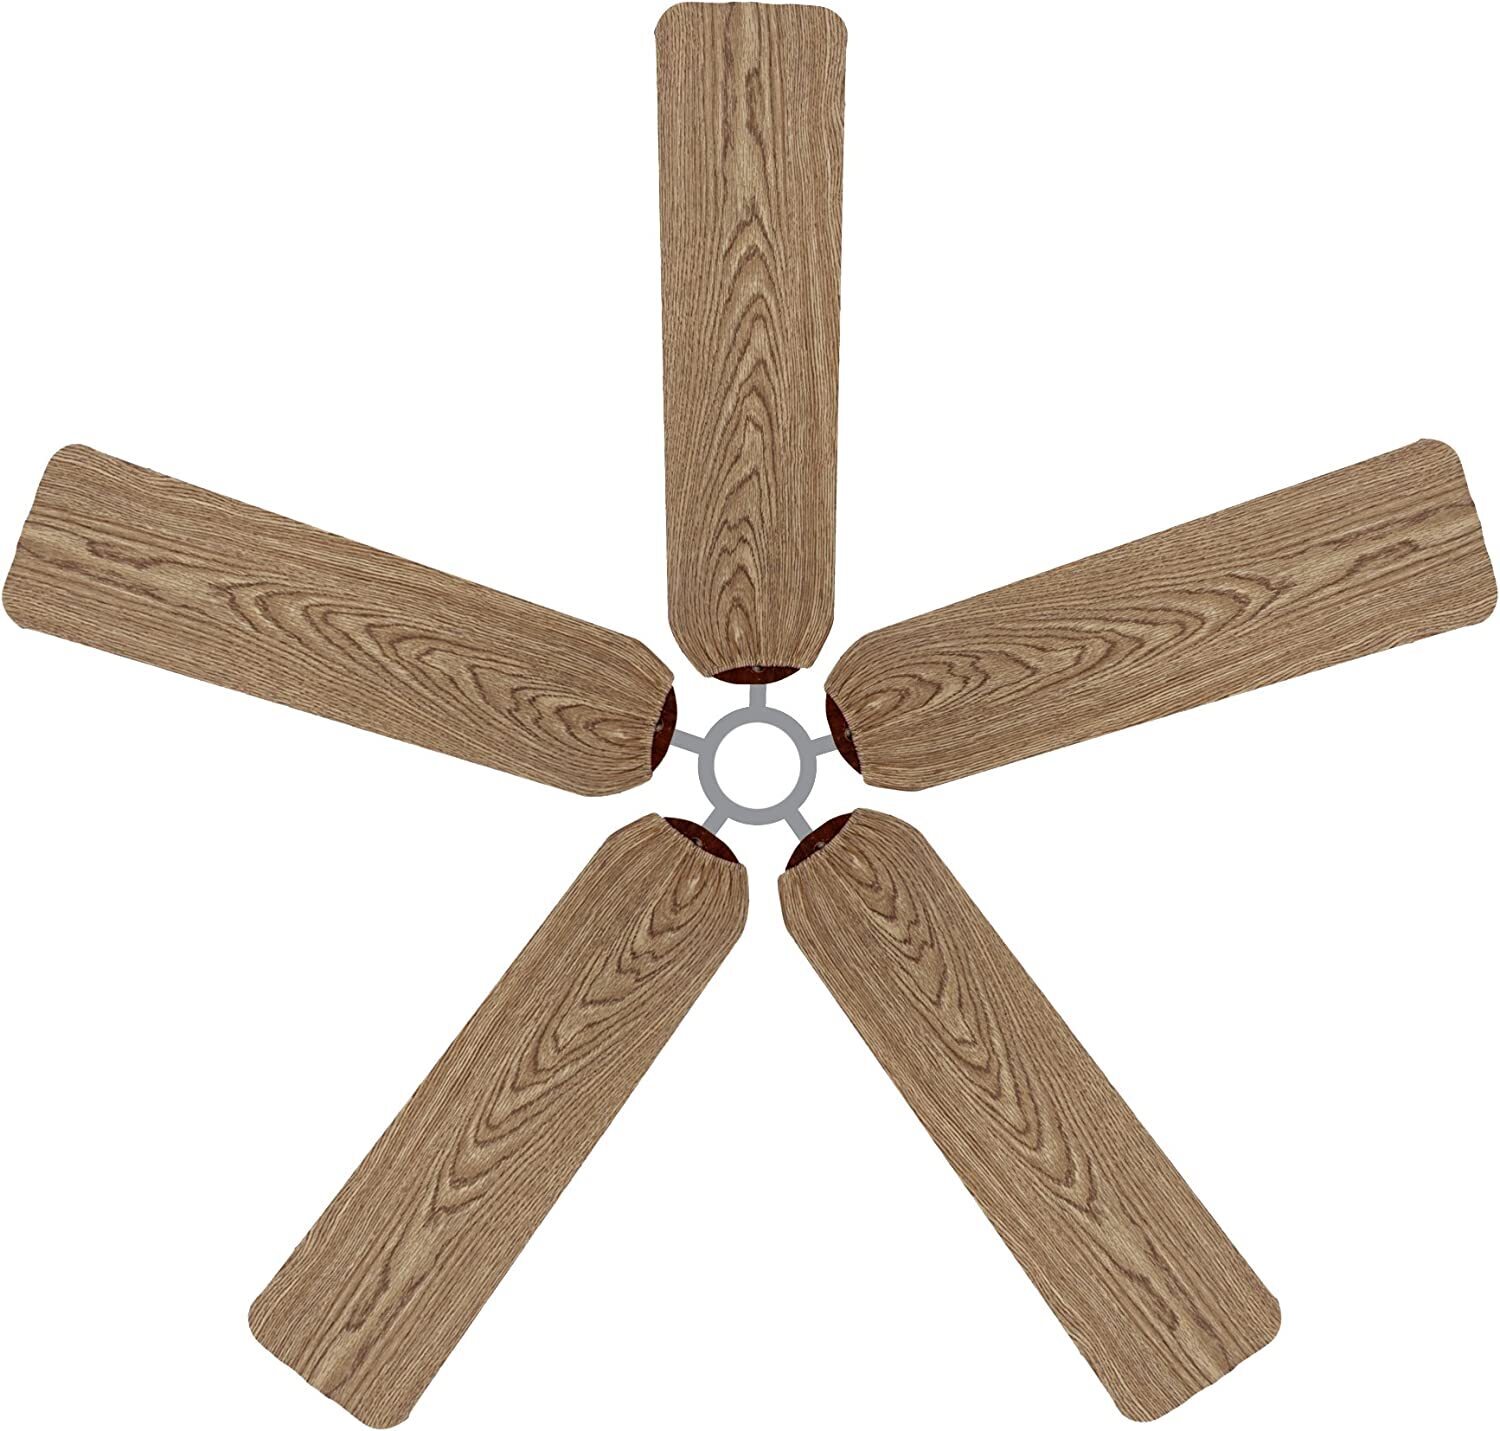 Lodge Style Slip On Ceiling Fan Blade Cover